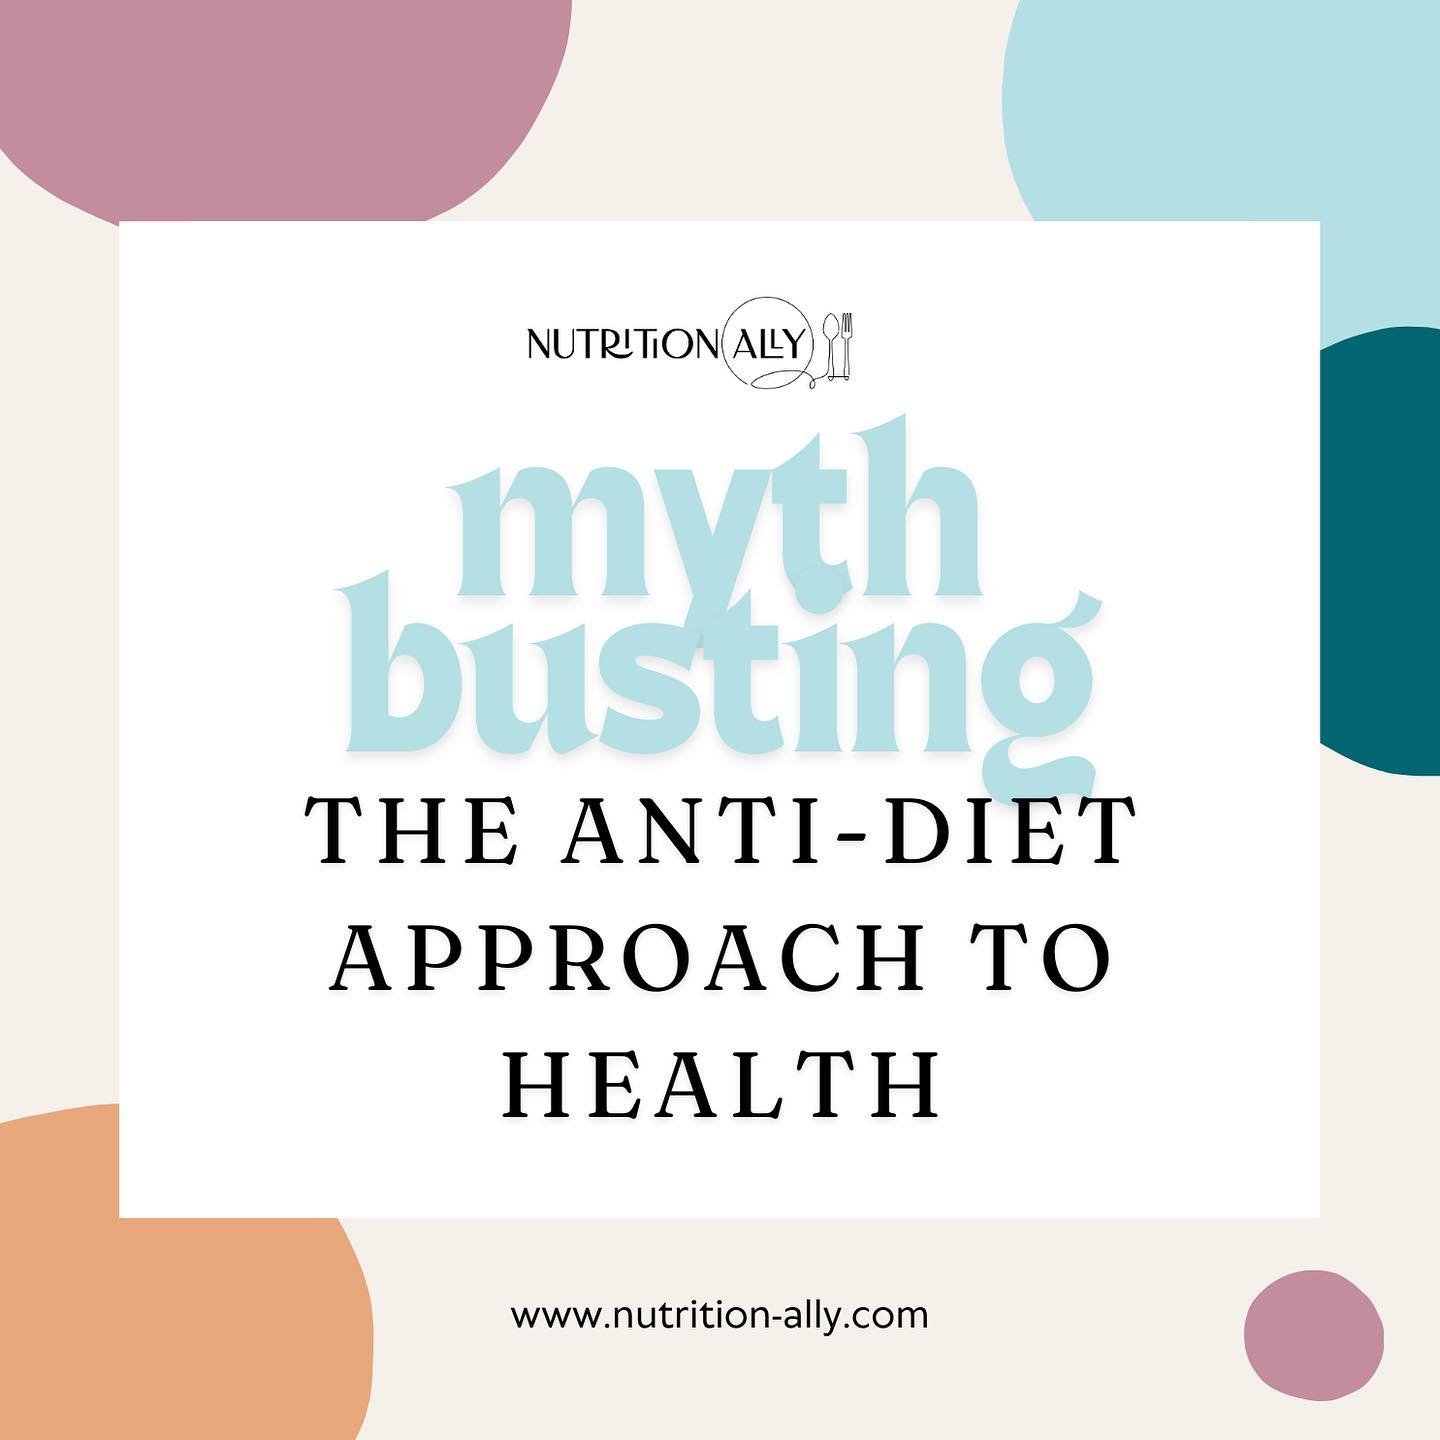 Clearing up 4 of the most common misconceptions  about the anti-diet approach 💛 #antidiet #yournutritionally #mnt #dietitian #weightneutral #mythbusting #rdapproved